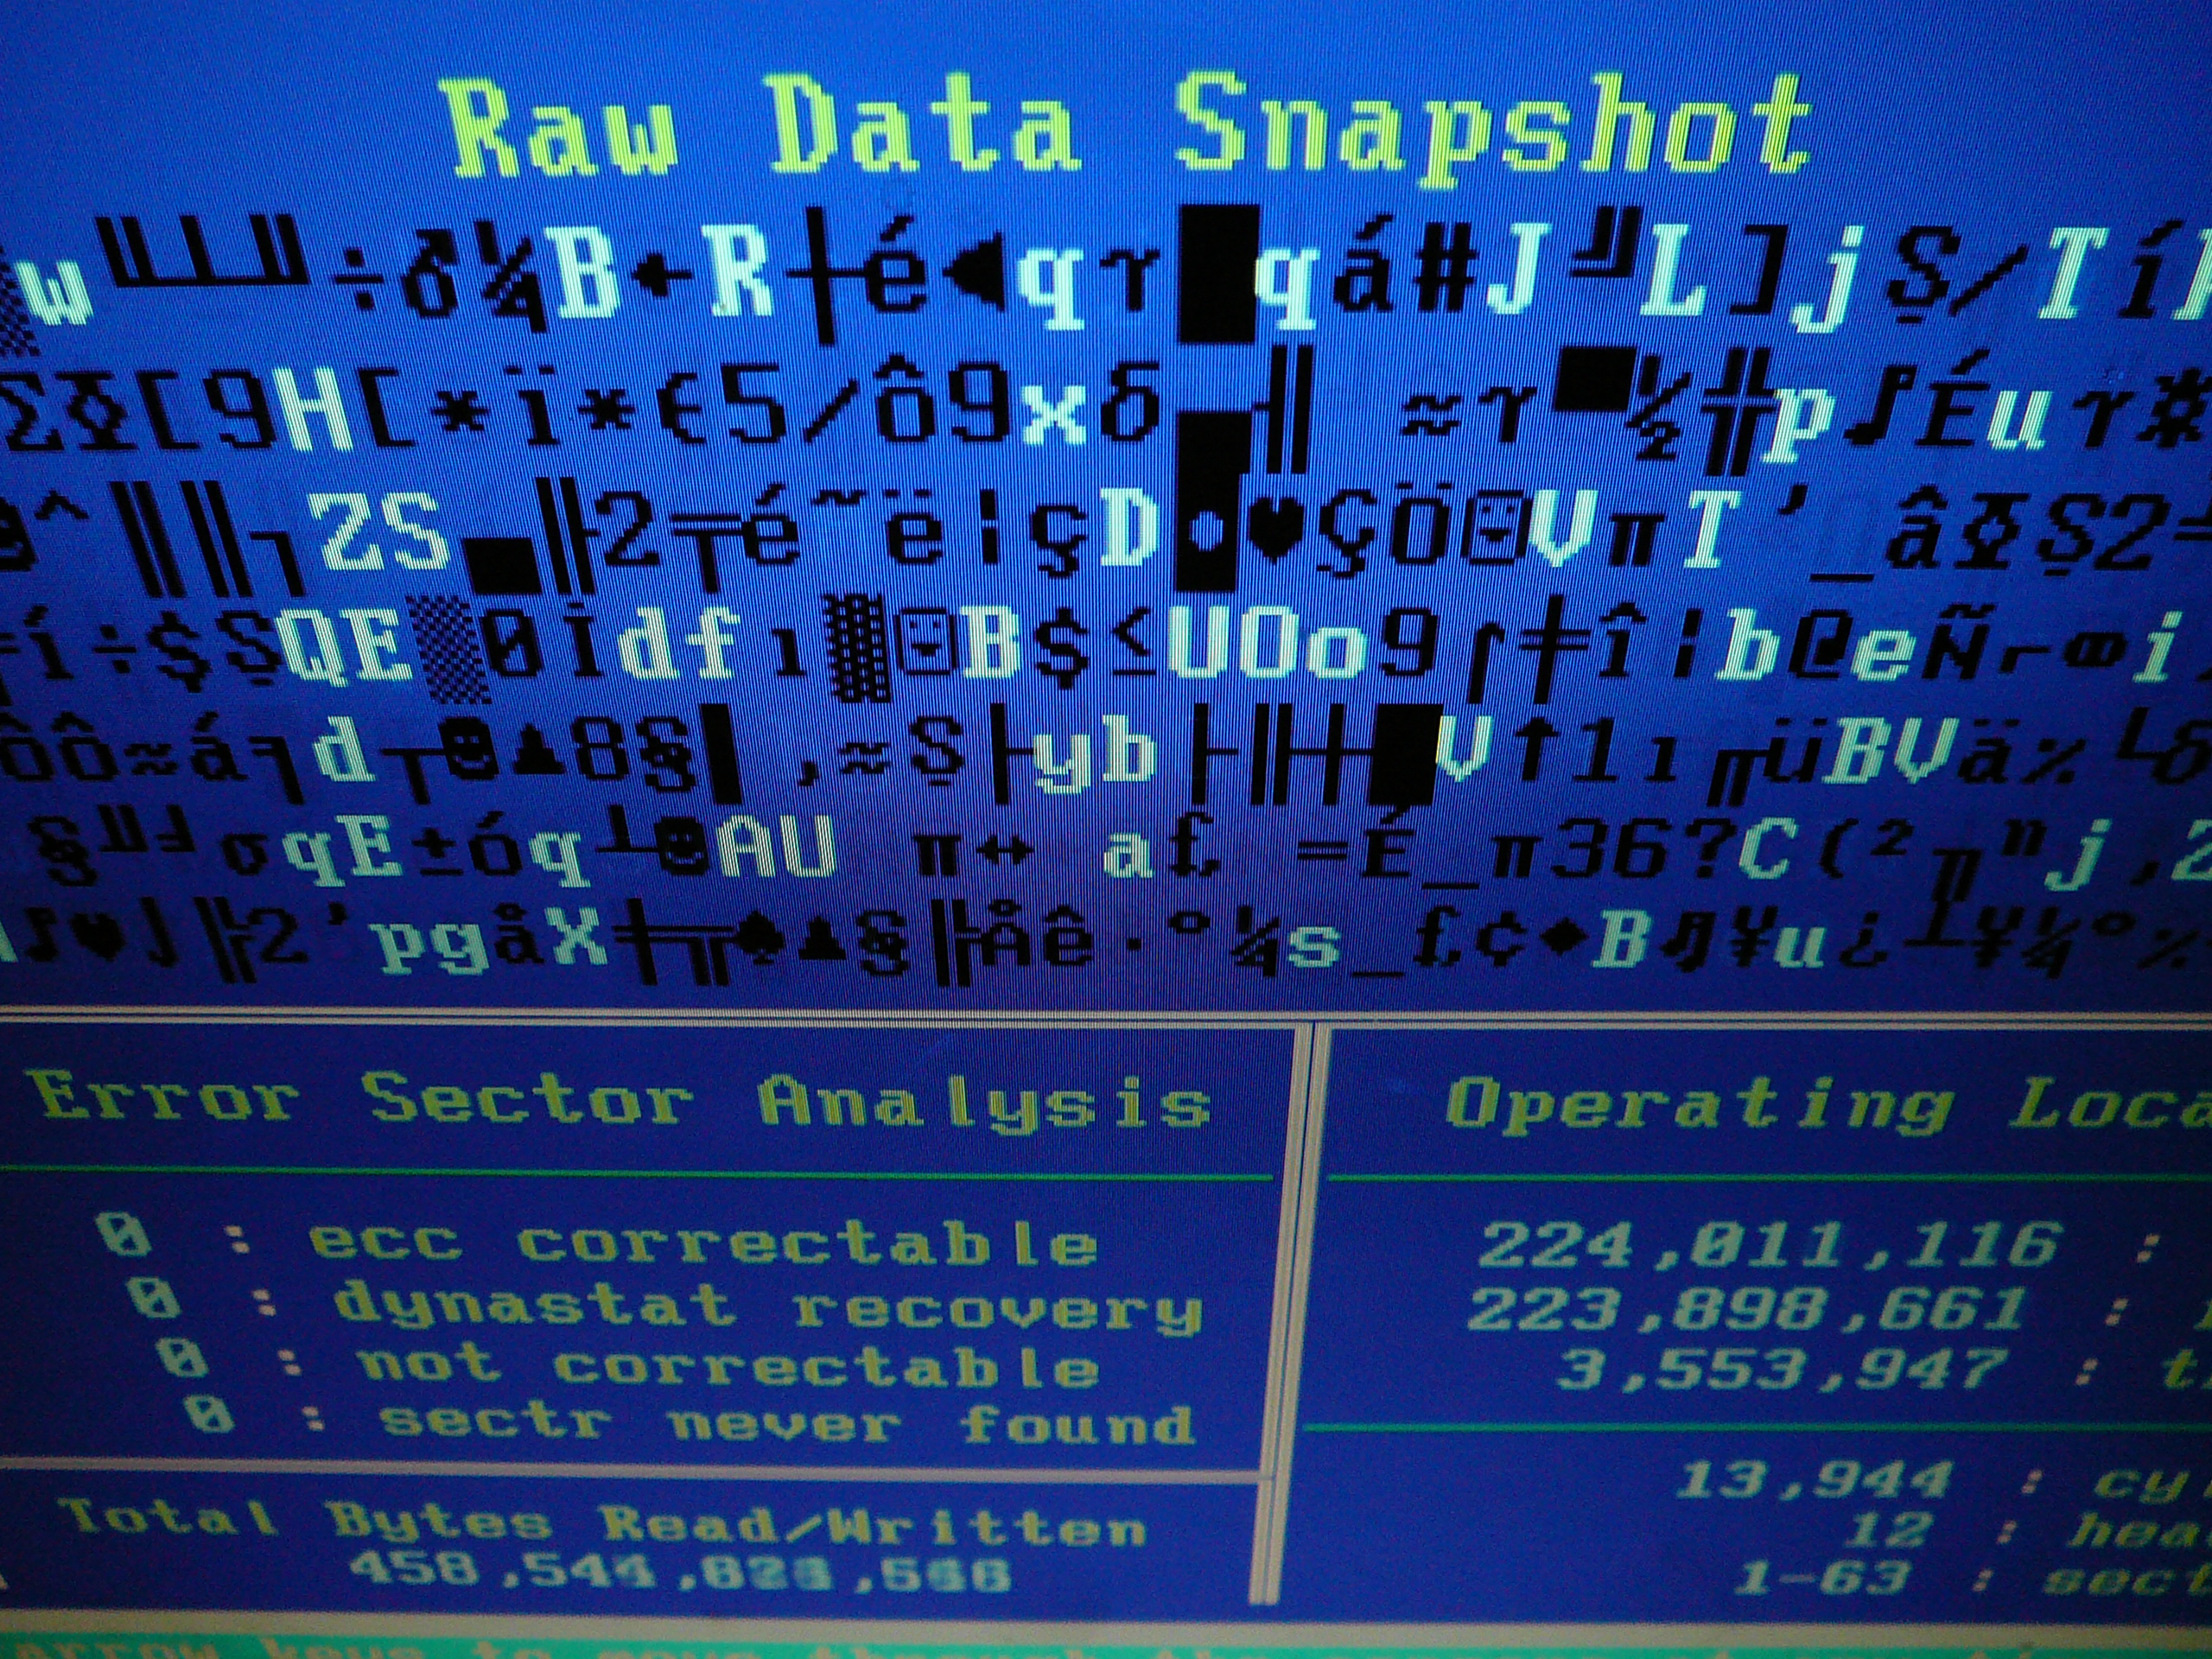 "raw data snapshot" by Paul L Dineen is licensed under CC BY 2.0.